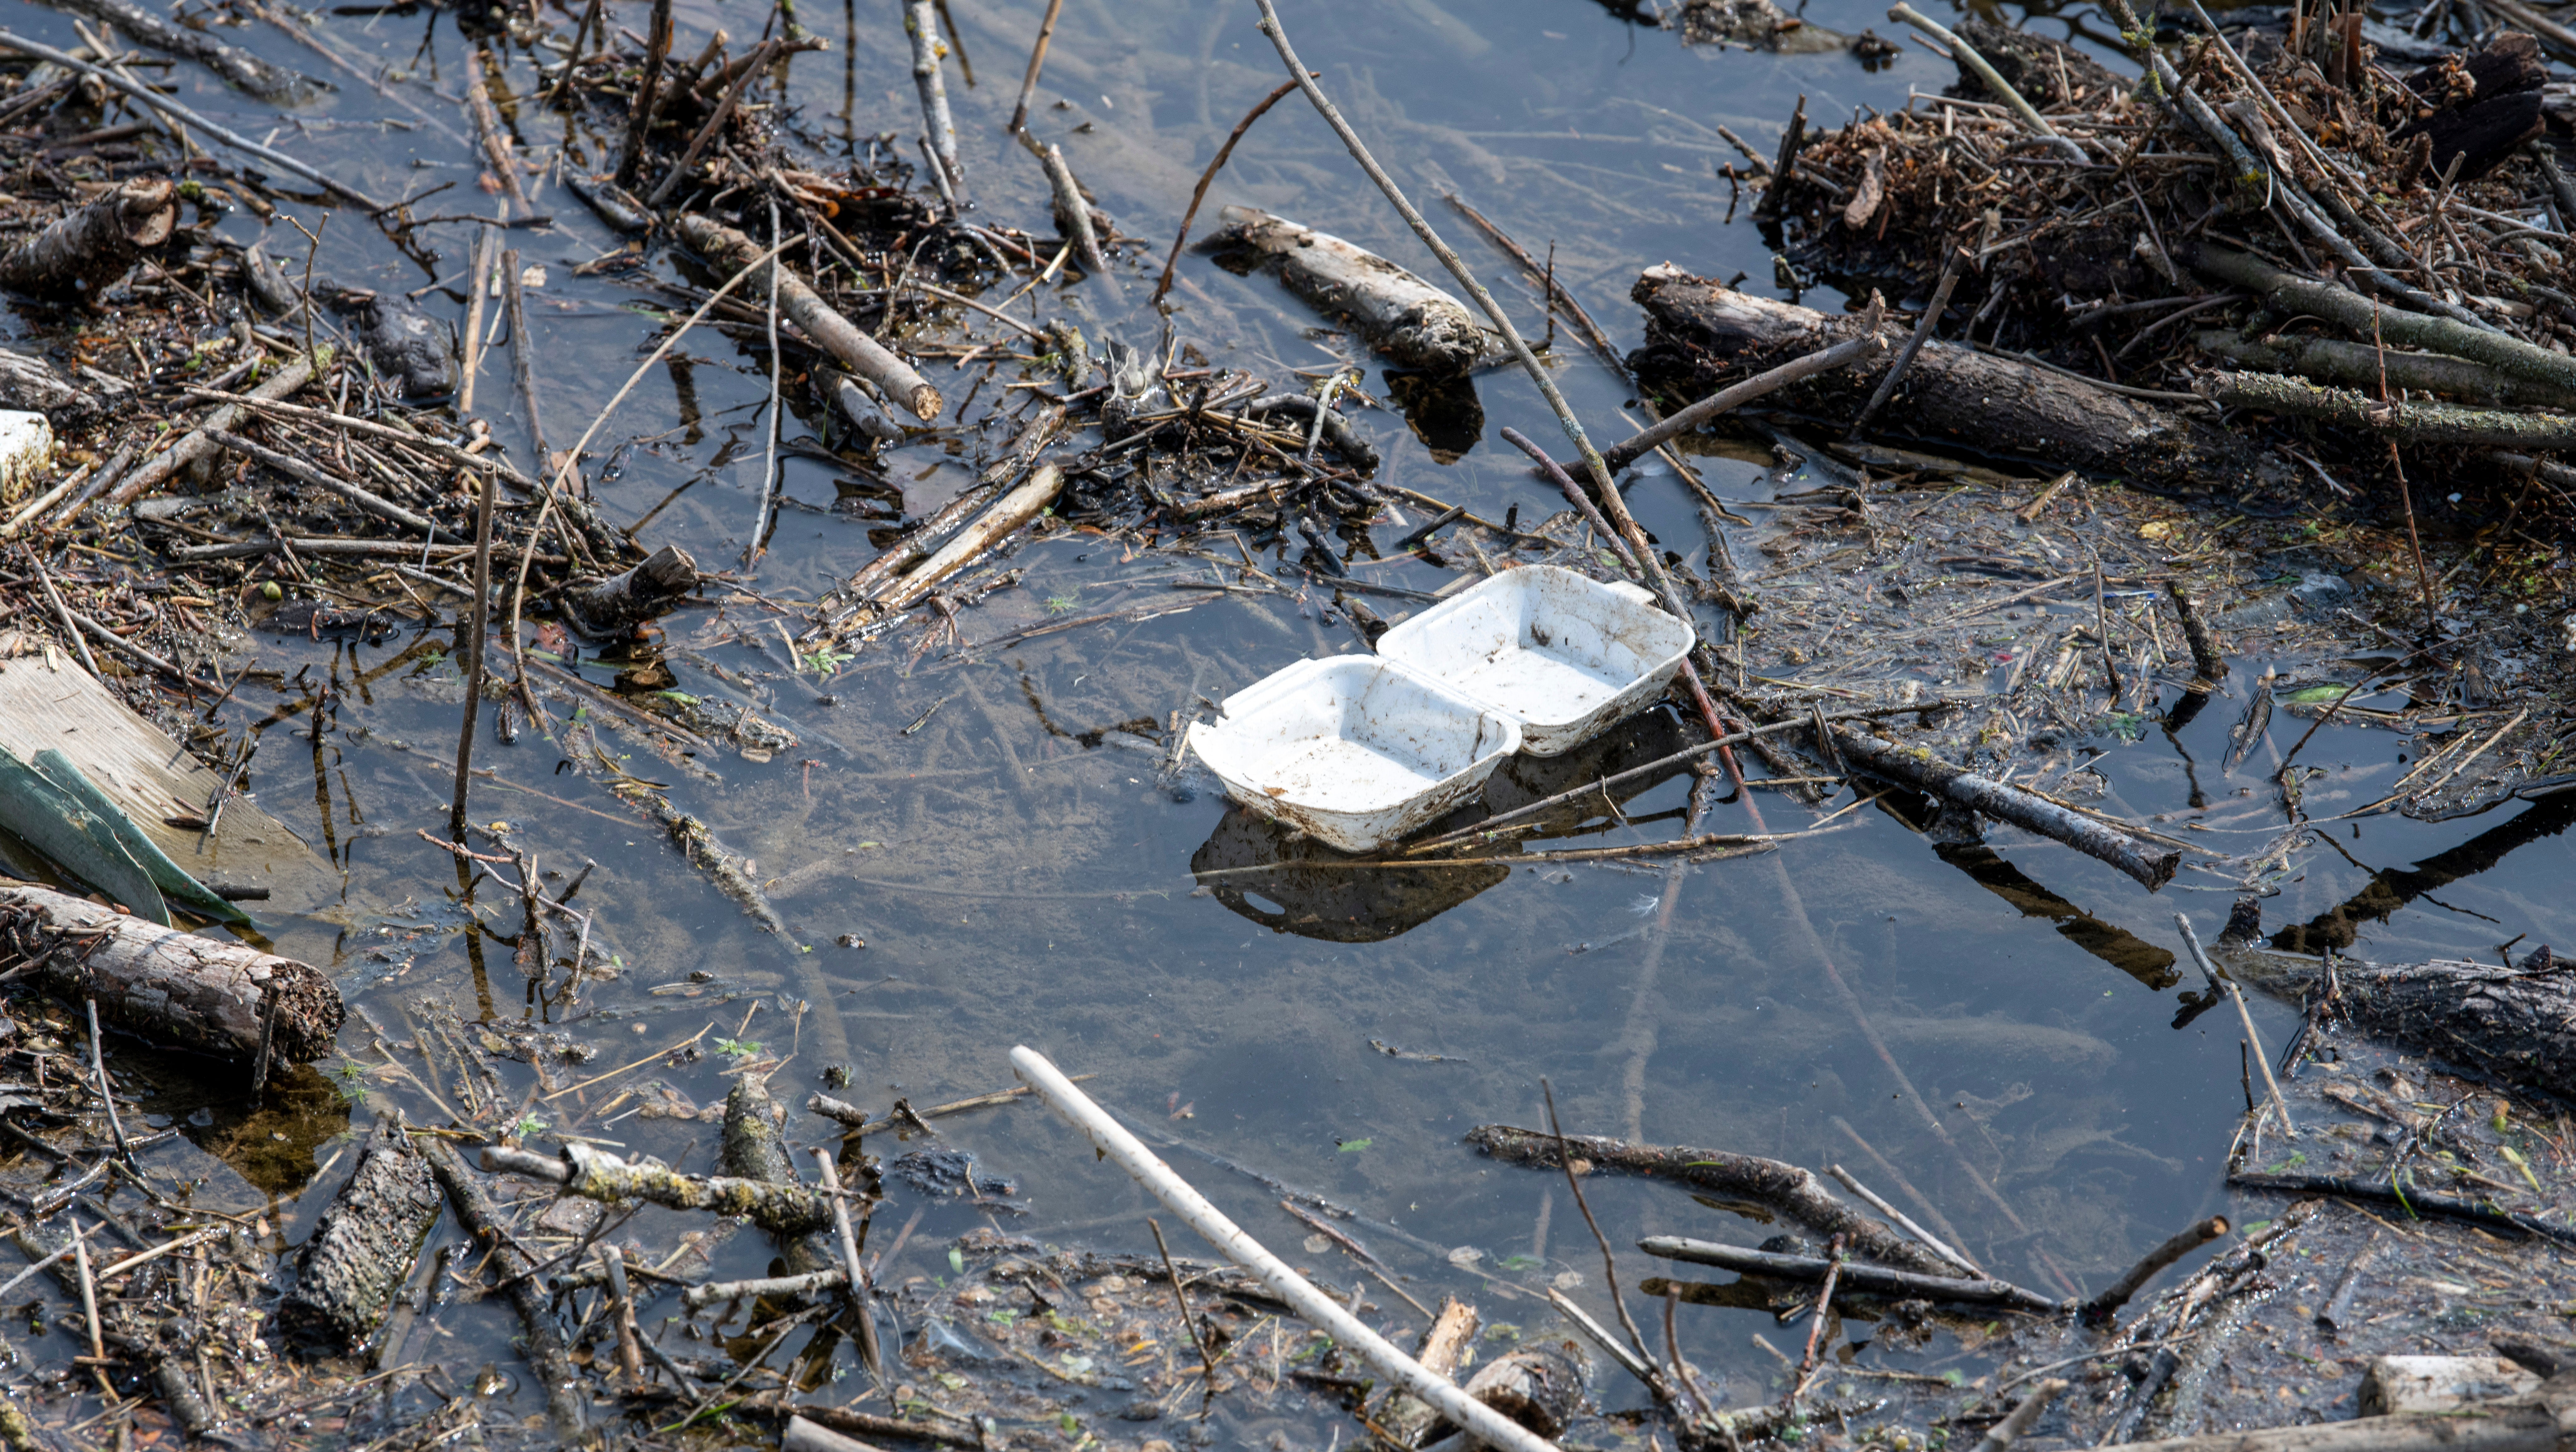 A Styrofoam container floats on the Danube in Germany. (Photo: Stefan Puchner/picture-alliance/dpa, AP)